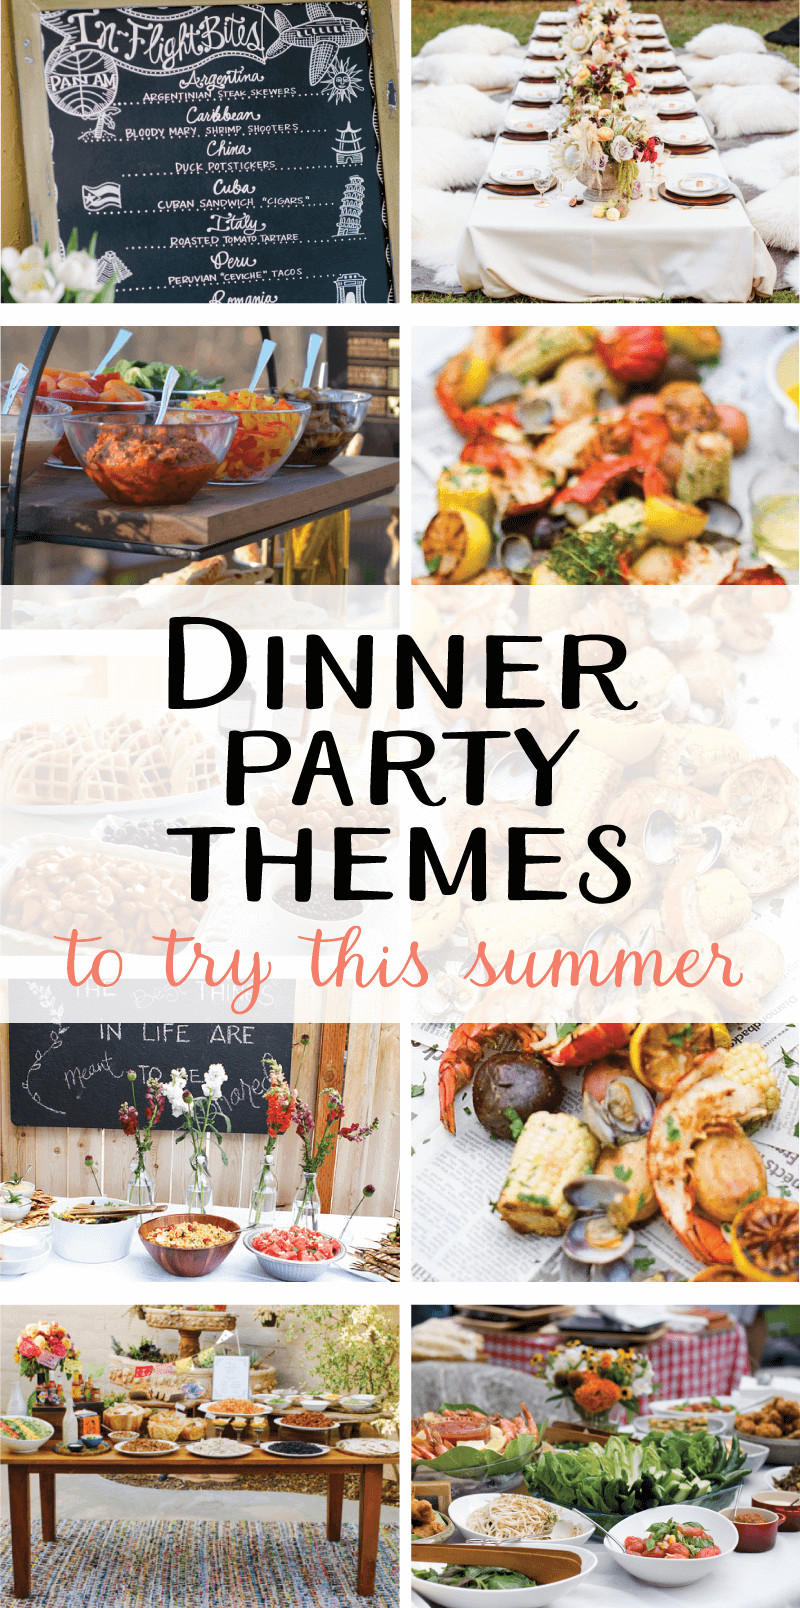 Dinner Party Foods Ideas
 9 Creative Dinner Party Themes to Try this Summer on Love